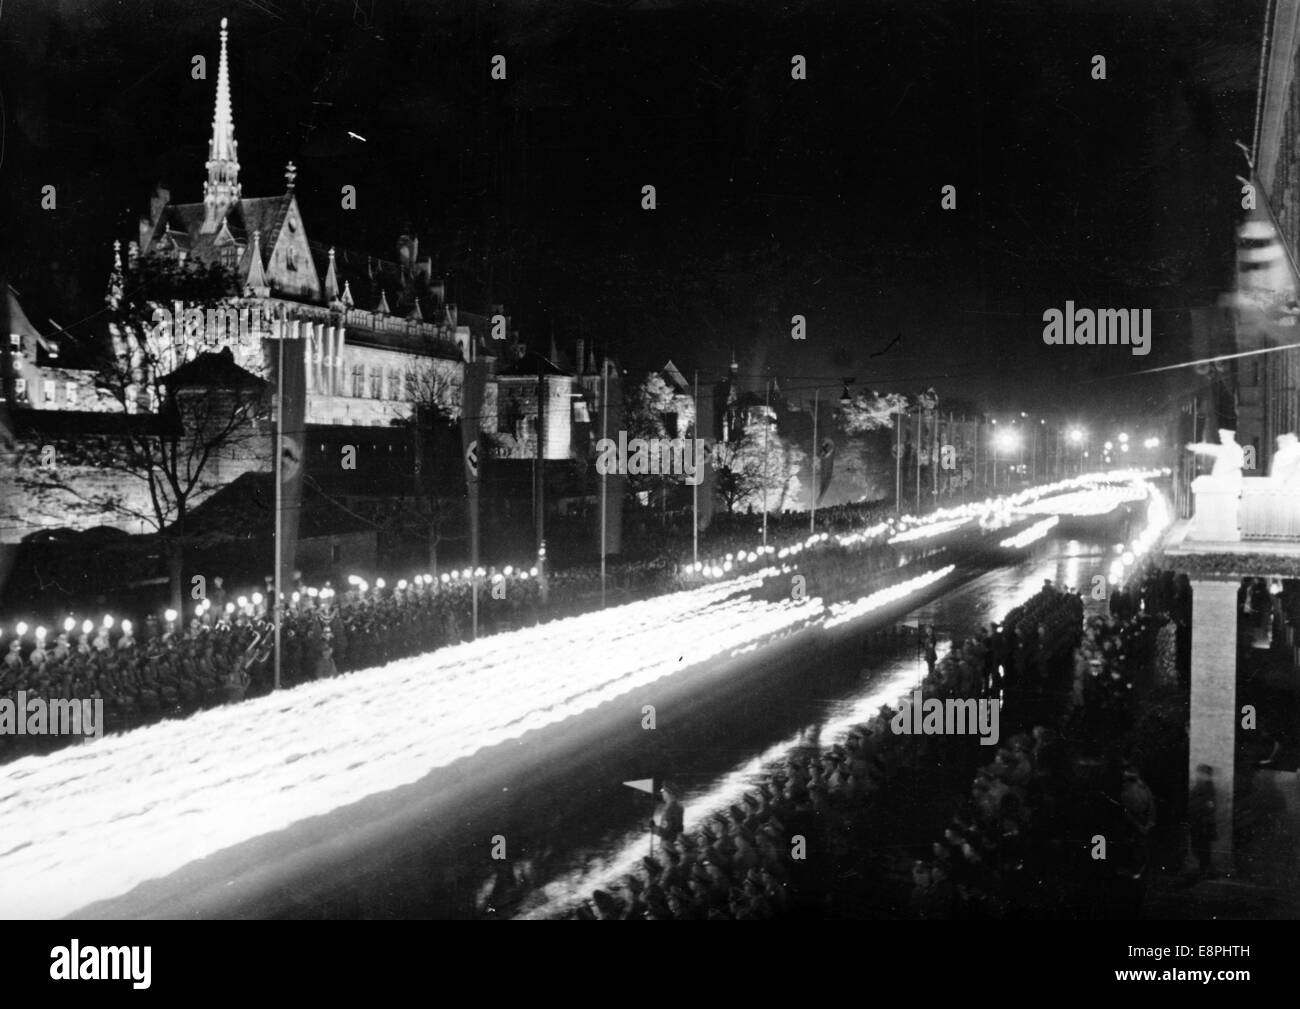 Nuremberg Rally 1937 in Nuremberg, Germany - The great torchlight procession of the political leaders marches past Adolf Hitler (R) on the balcony oh hotel 'Deutscher Hof'. (Flaws in quality due to the historic picture copy) Fotoarchiv für Zeitgeschichtee - NO WIRE SERVICE - Stock Photo